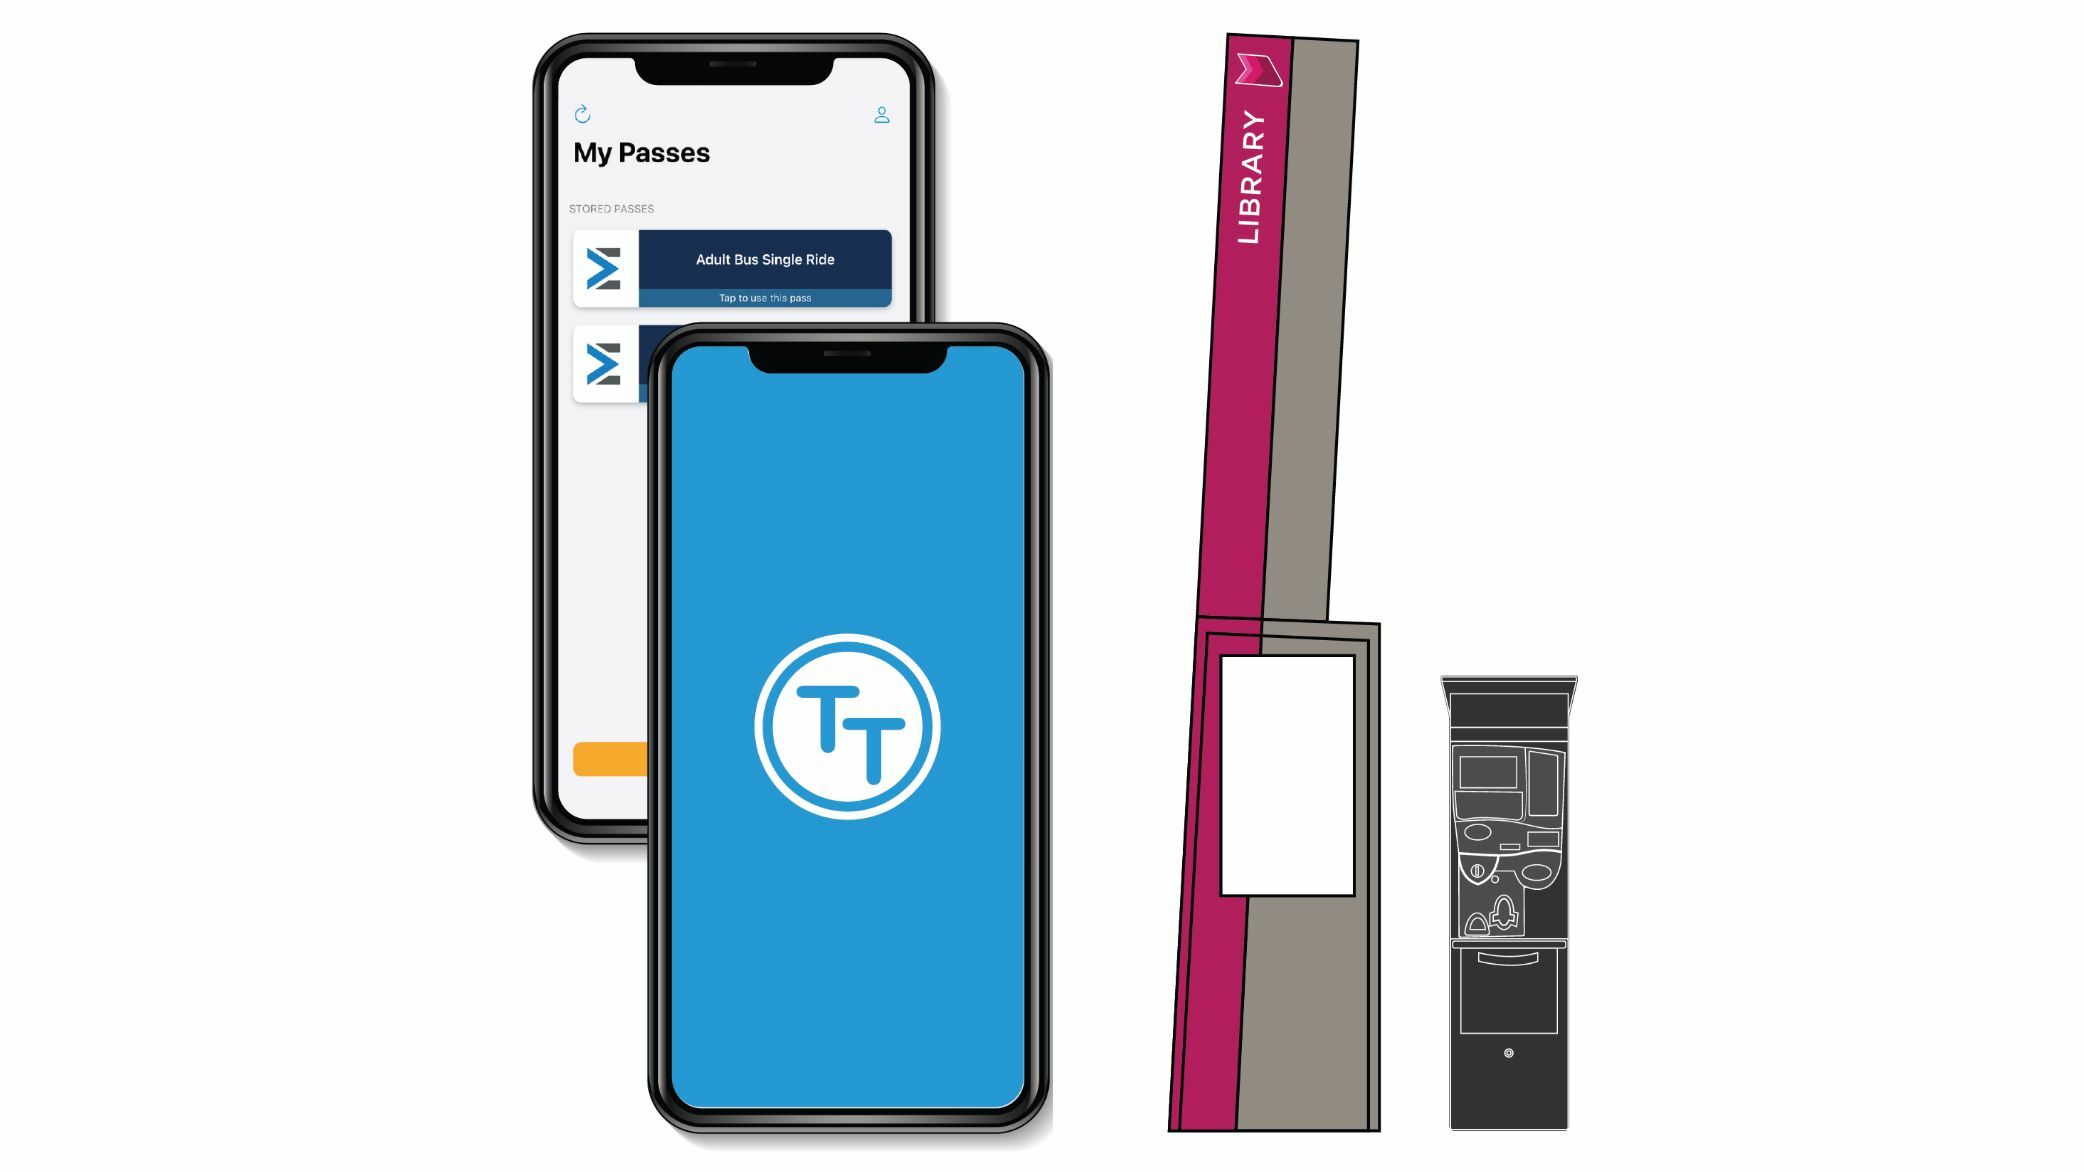 Graphic of Streetcar passes available - online, Token Transit App, Pylons, or TVM's.